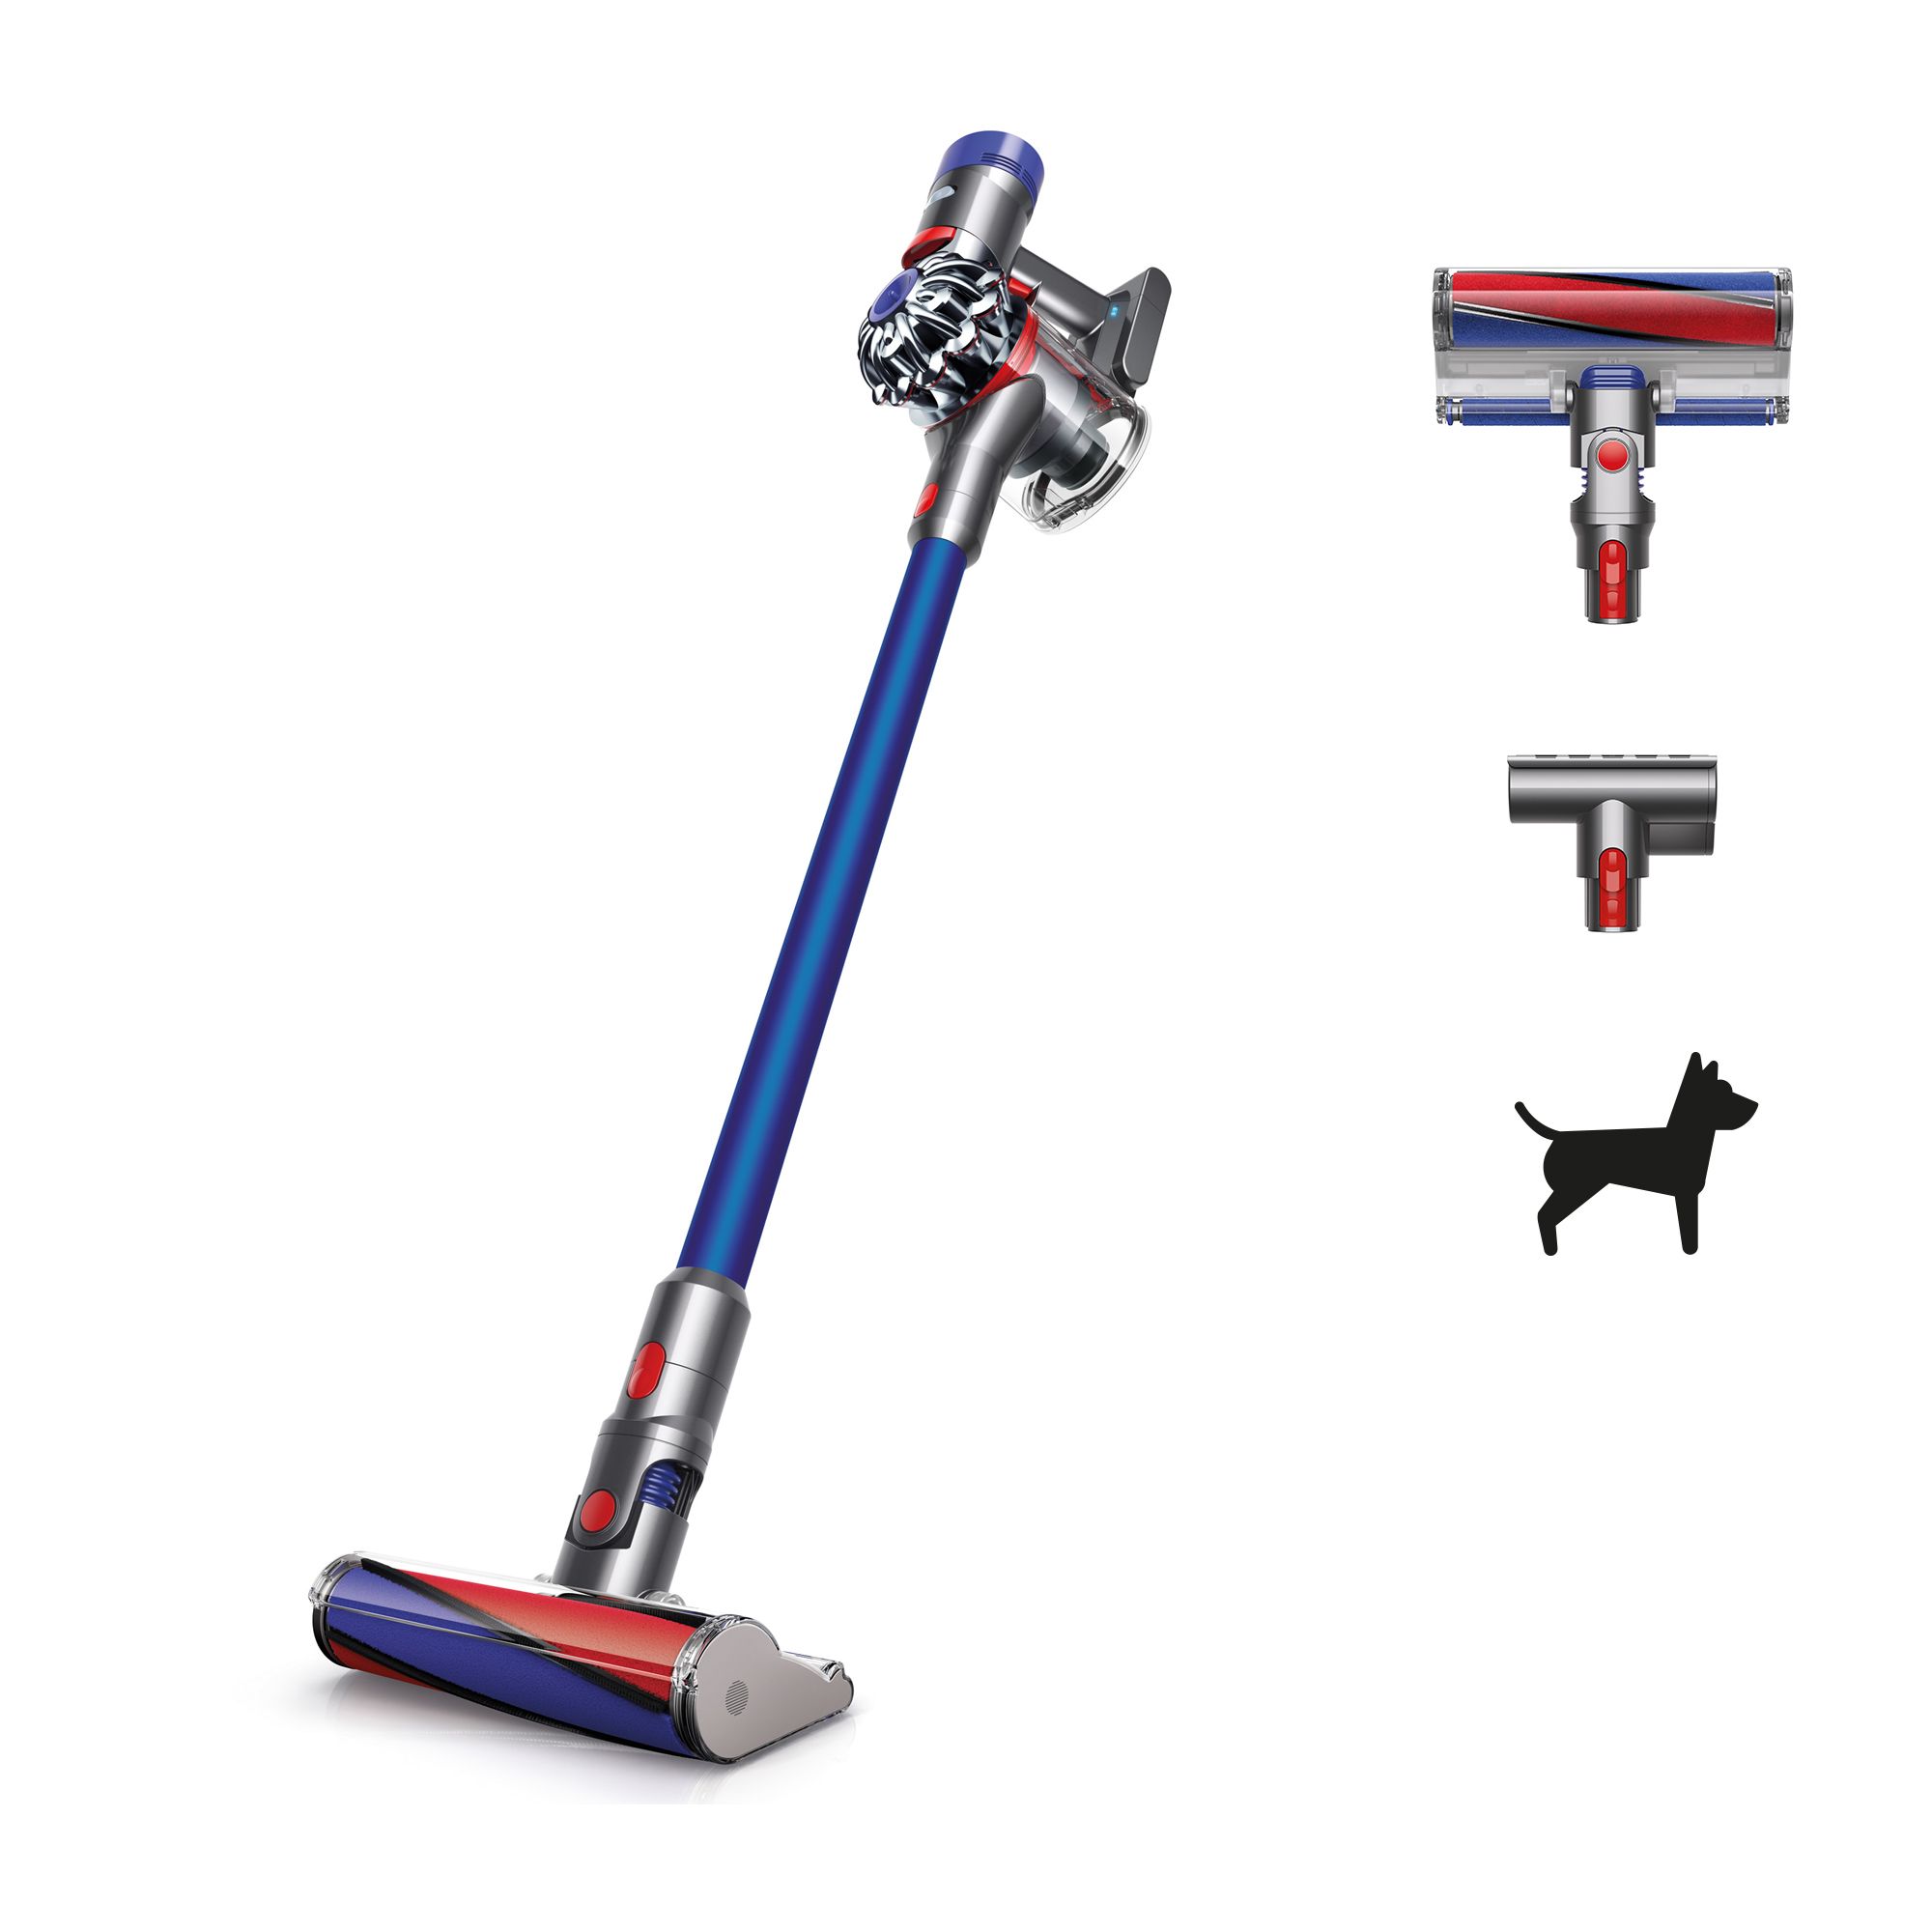 The Best 8 Dyson Vacuums In 2021, Best Cordless Dyson For Hardwood Floors